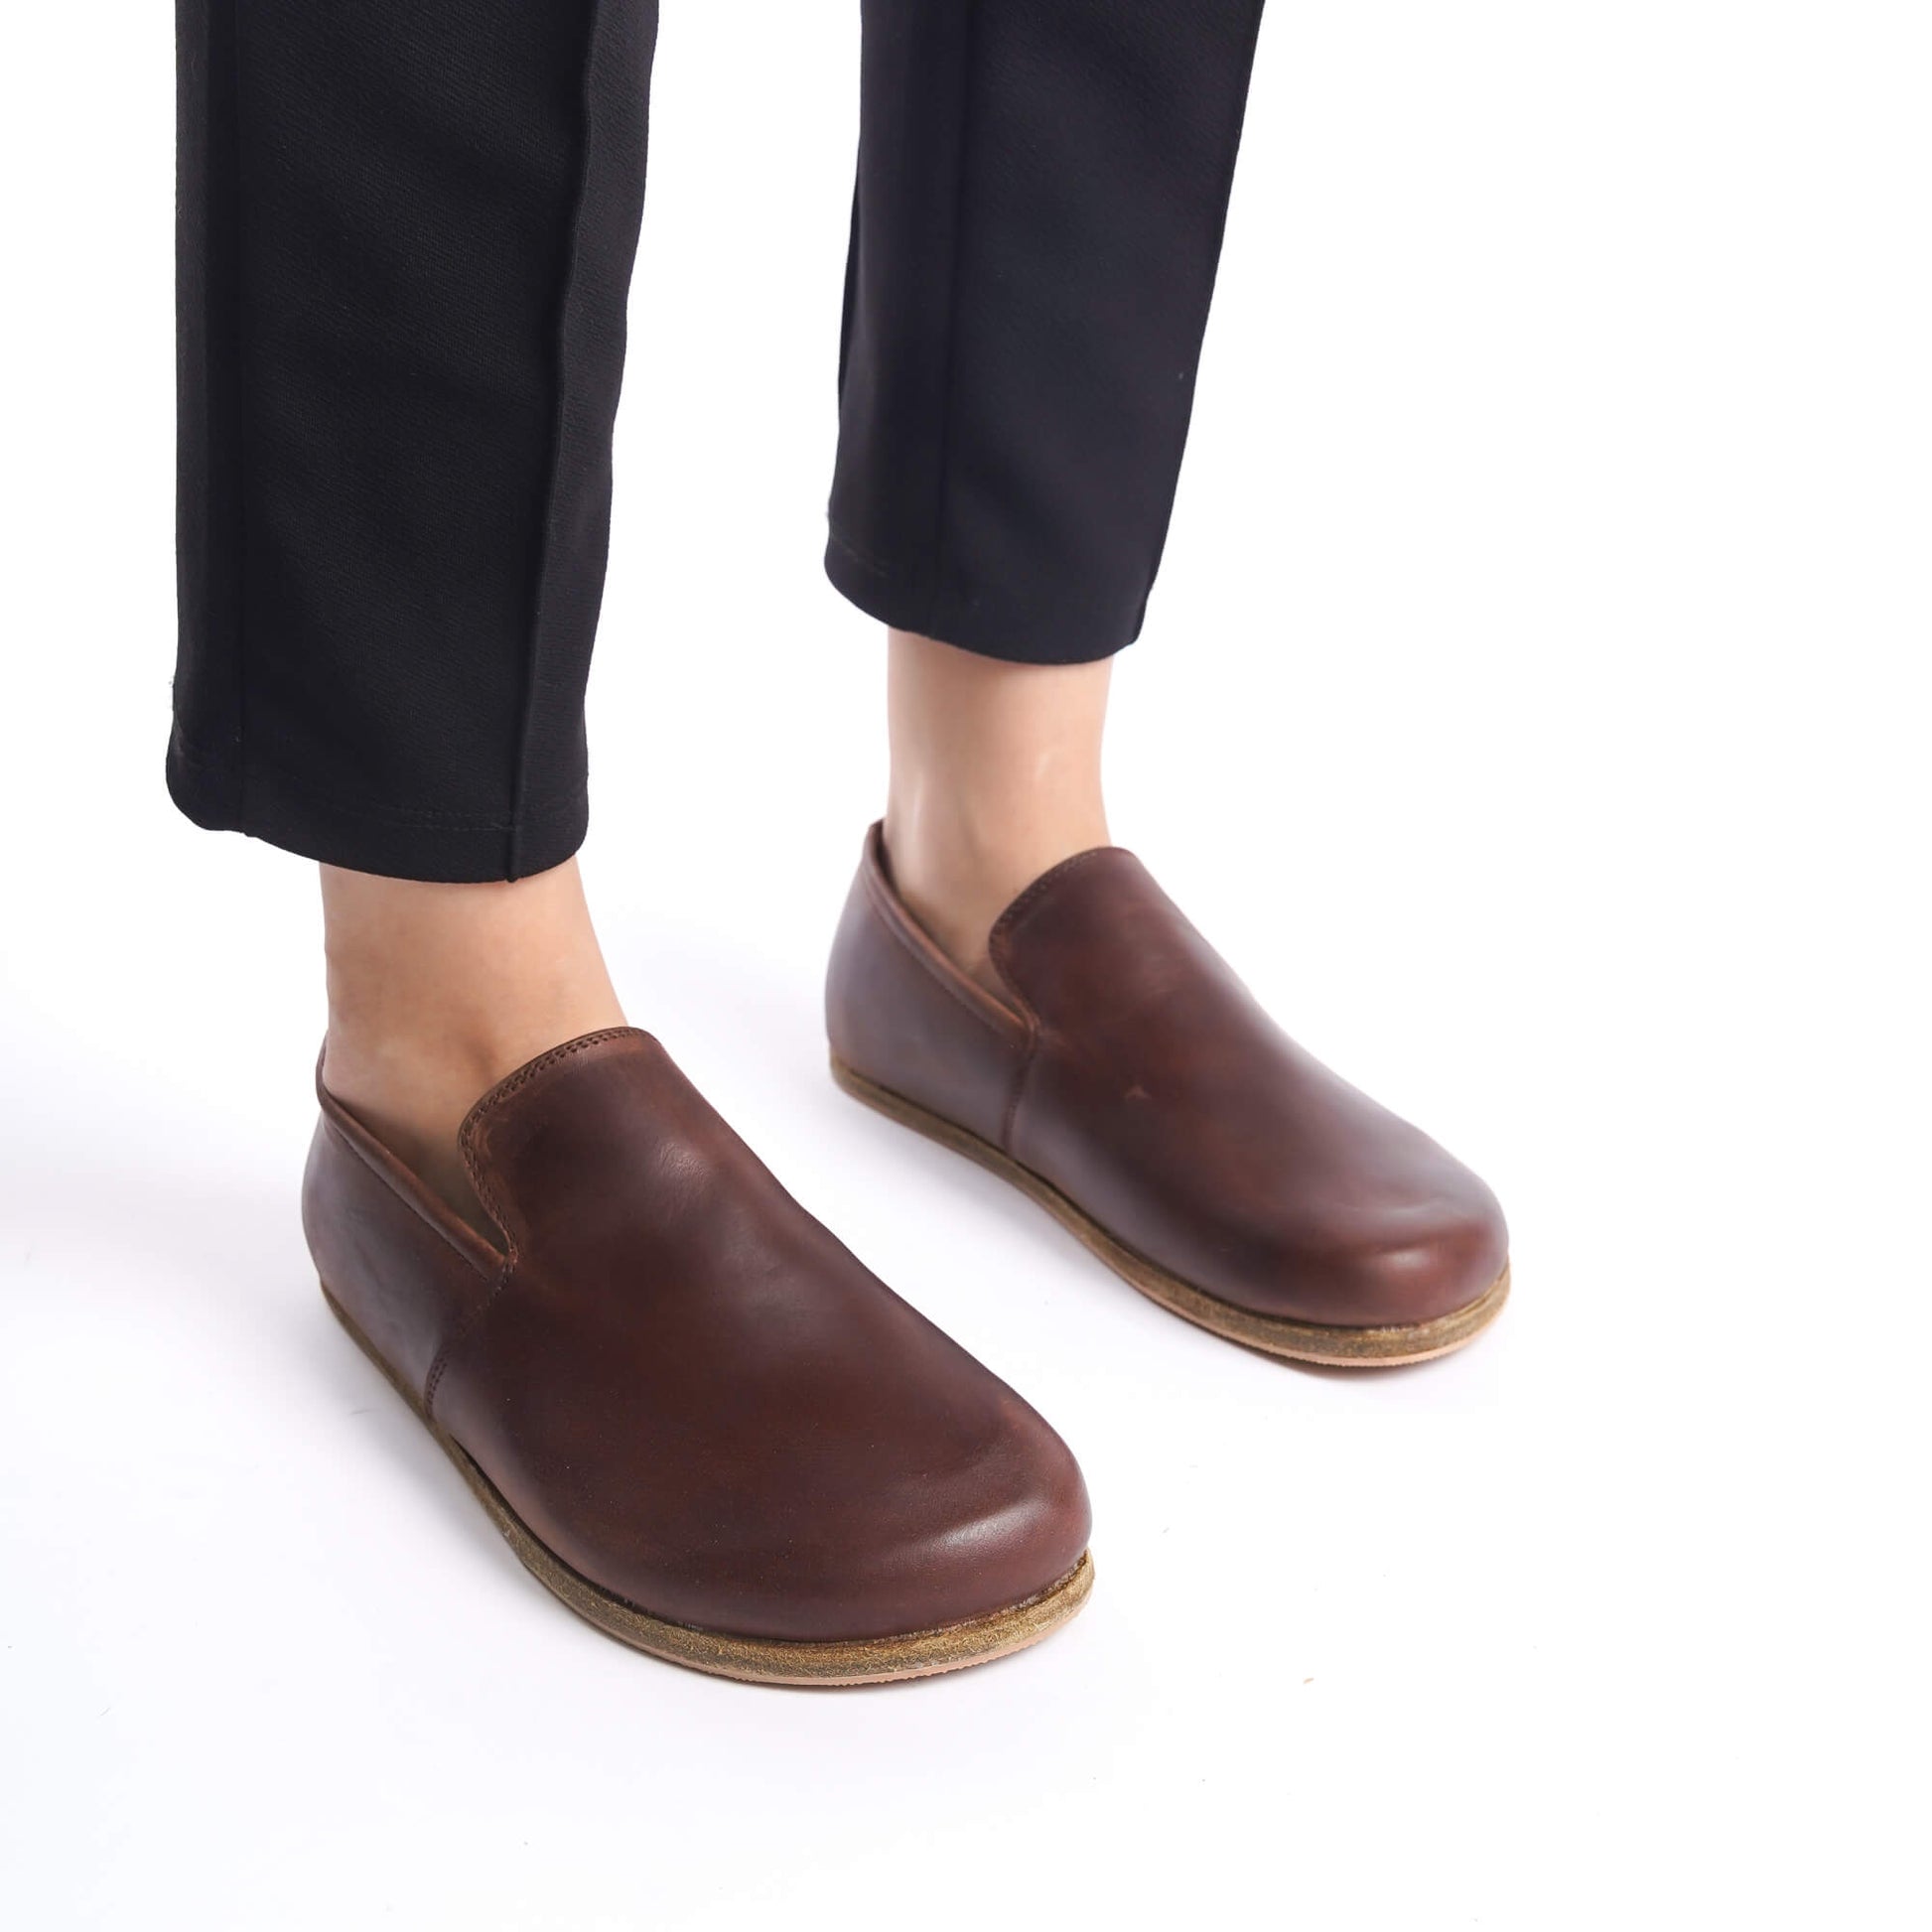 Model wearing Aeolia Brown Women Loafers with black pants, showcasing the loafer's minimalist design and comfortable fit.